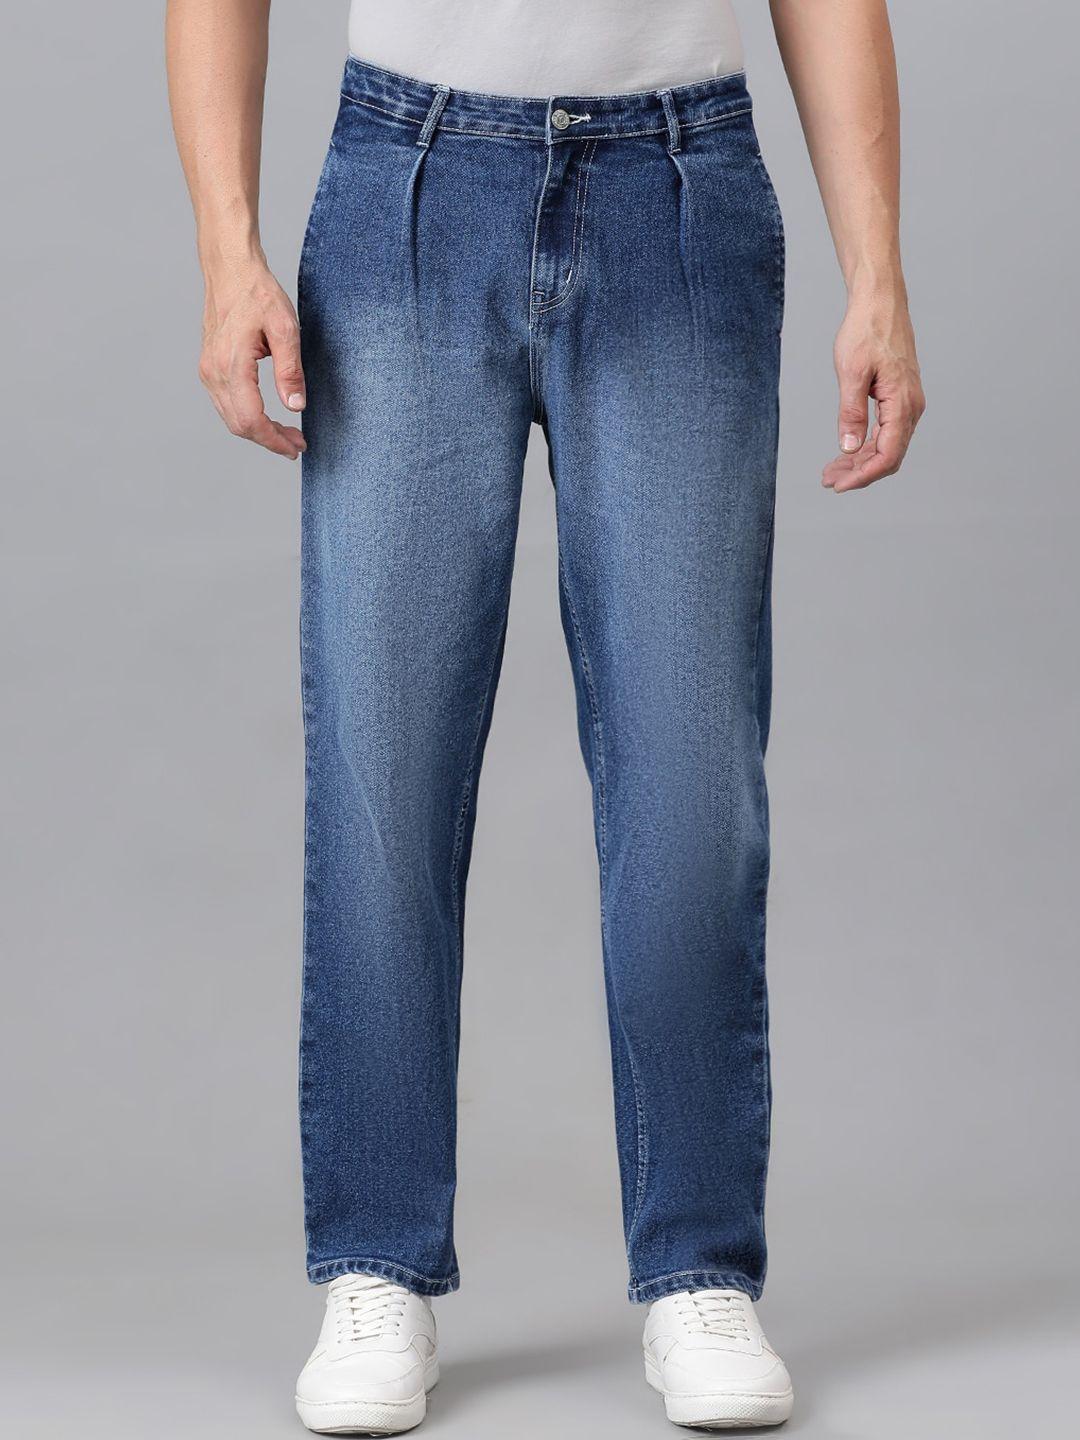 kotty-men-jean-low-rise-clean-look-heavy-fade-stretchable-jeans